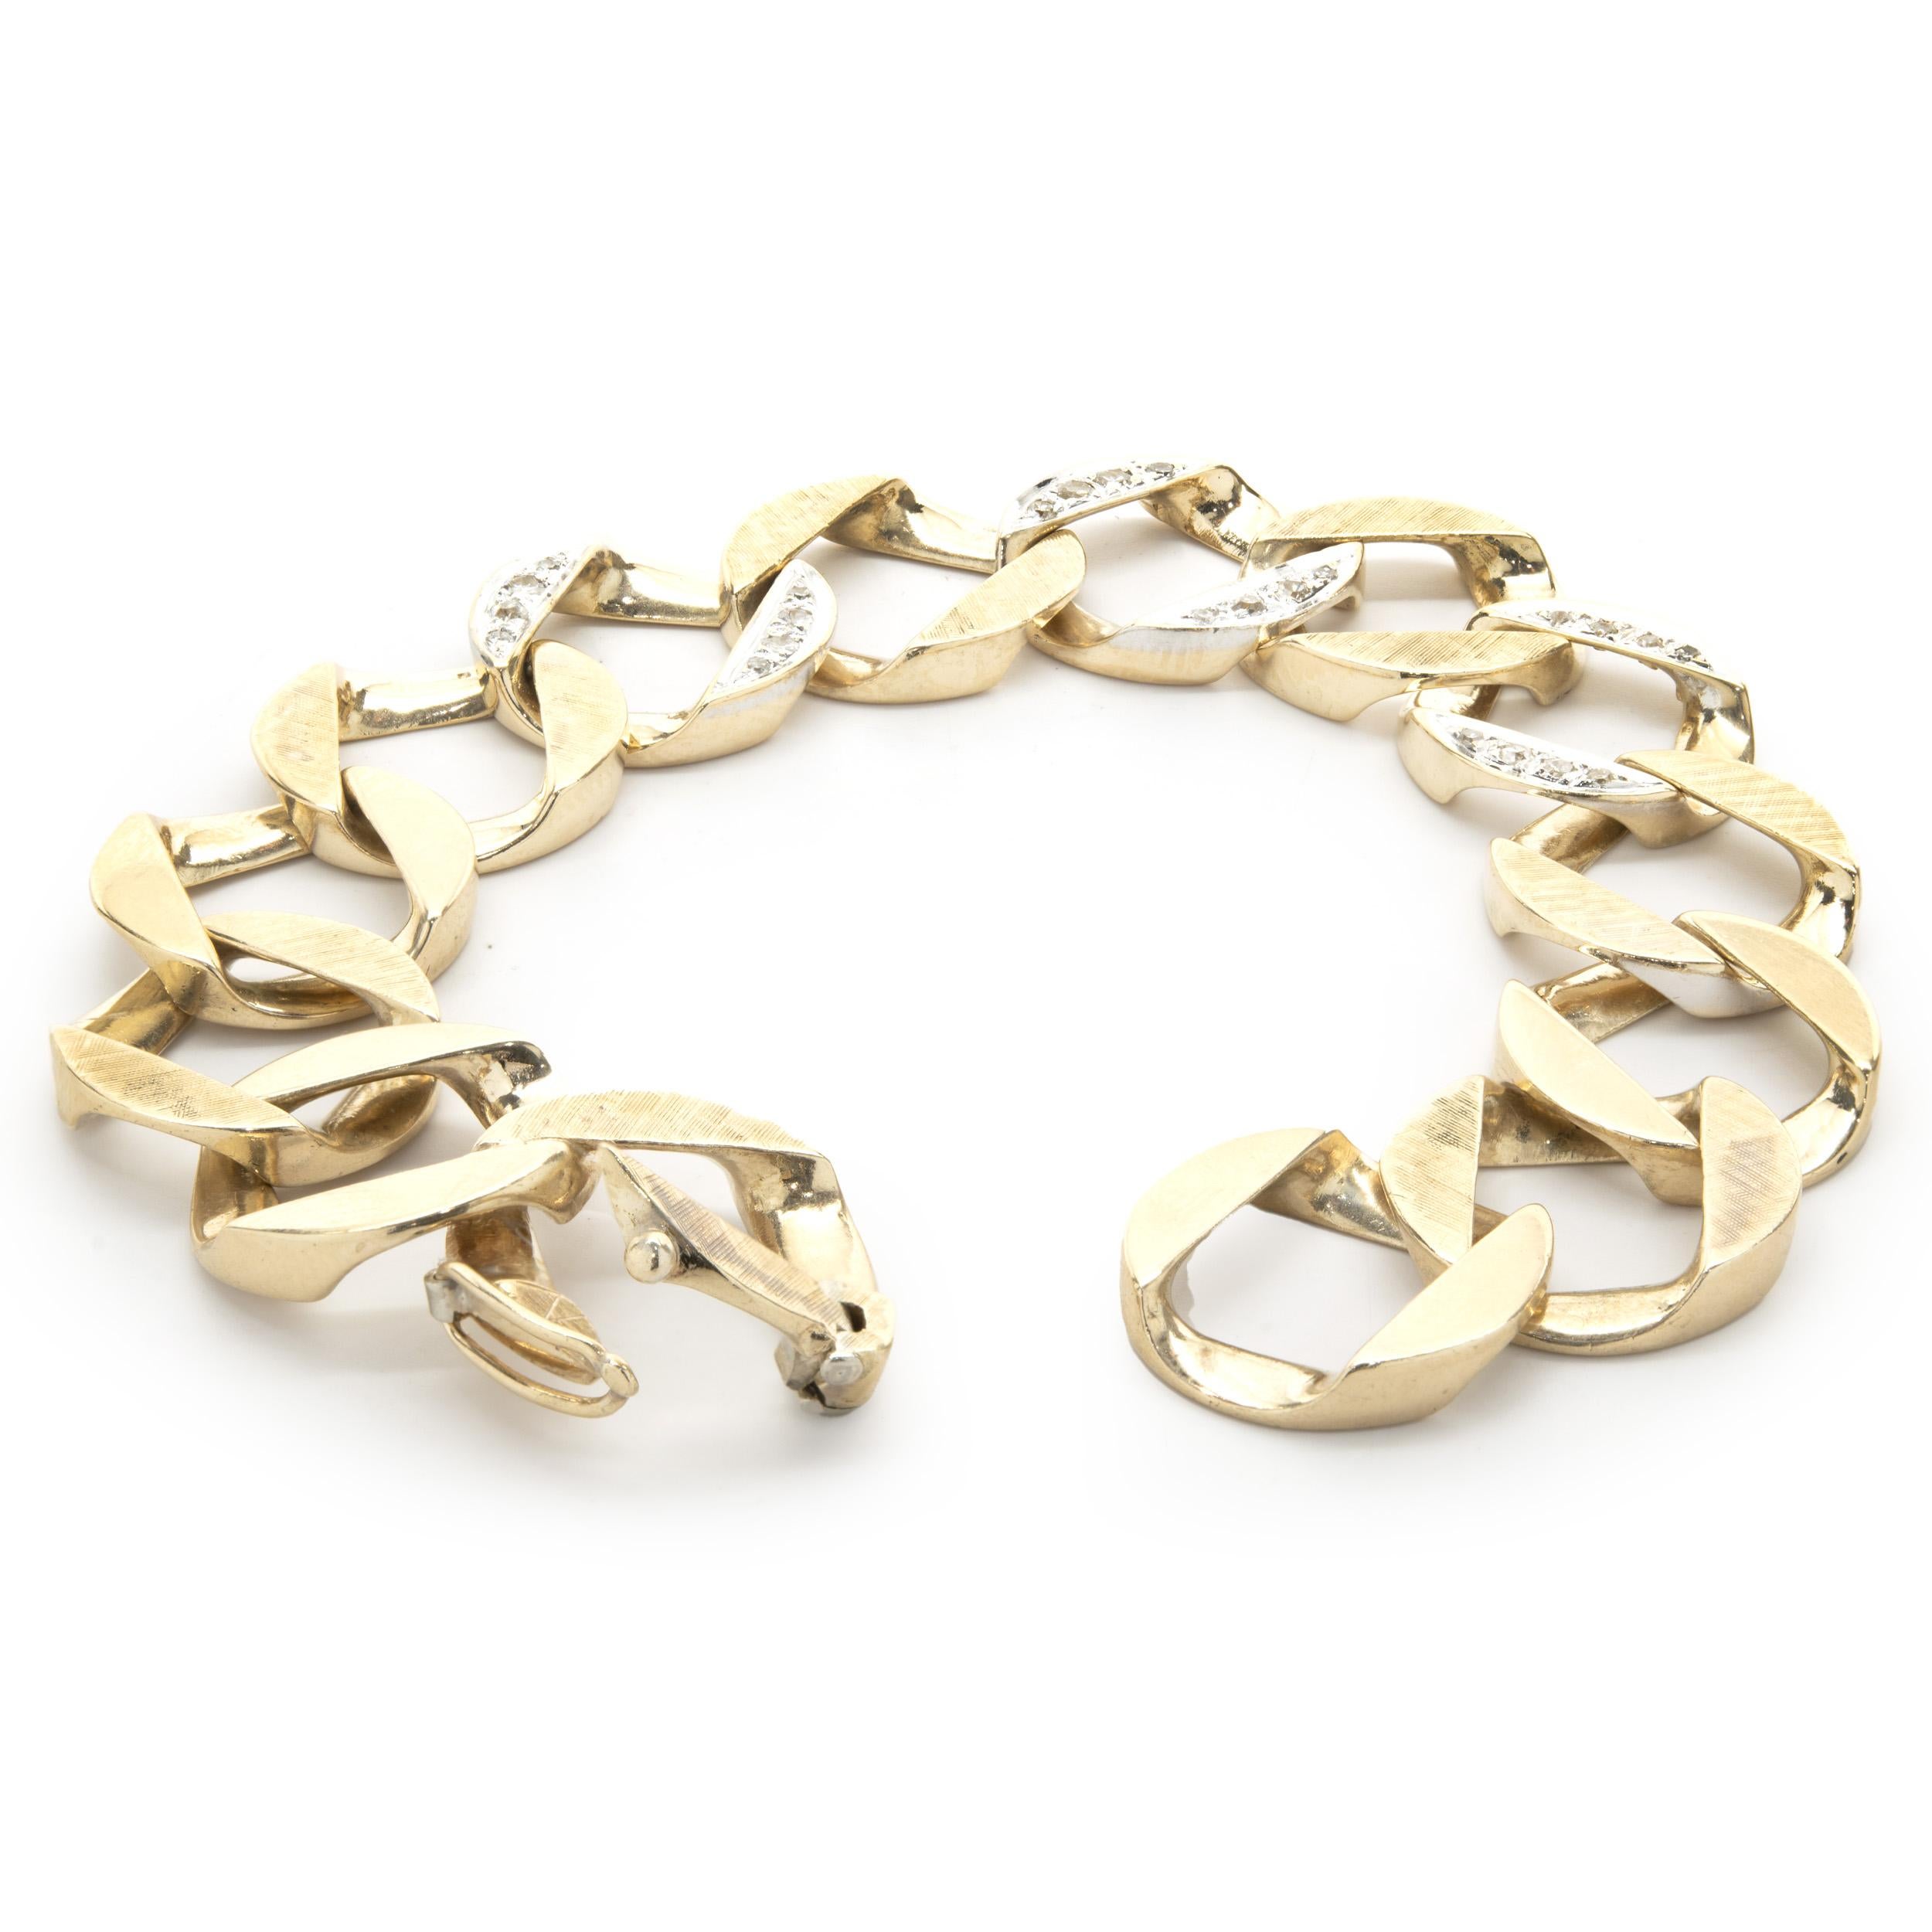 Designer: custom design
Material: 14K yellow gold
Diamonds: 24 round single cut = 0.45cttw
Color: H
Clarity: SI2
Dimensions: bracelet will fit up to a 14-inch wrist
Weight: 41.0 grams